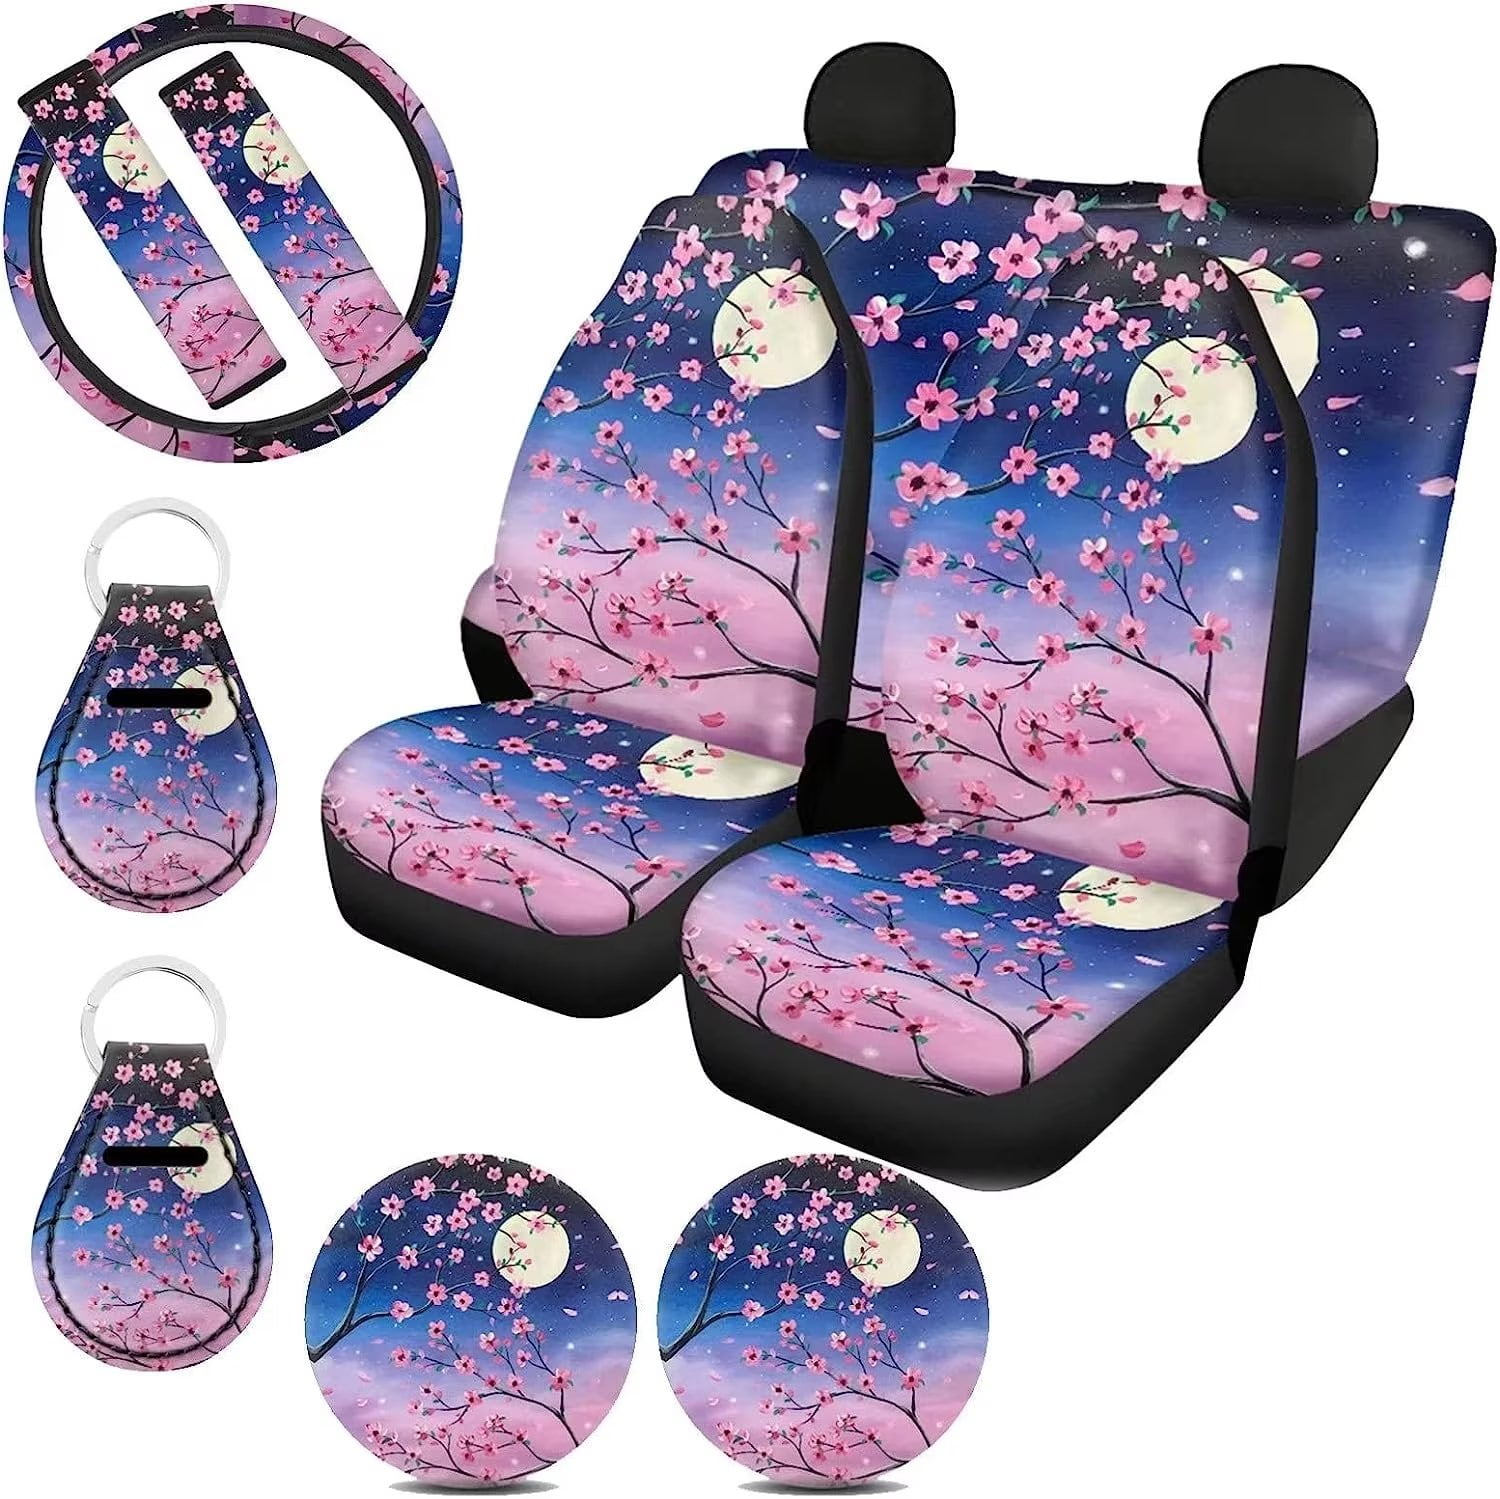 Pzuqiu Axolotl Car Seat Covers Full Set 11 Pieces Girls Truck Accessories  Pink and Black Cherry Blossom Keychain for Women Steering Wheel Covers for  Vehicle Coasters for Cup Holder 